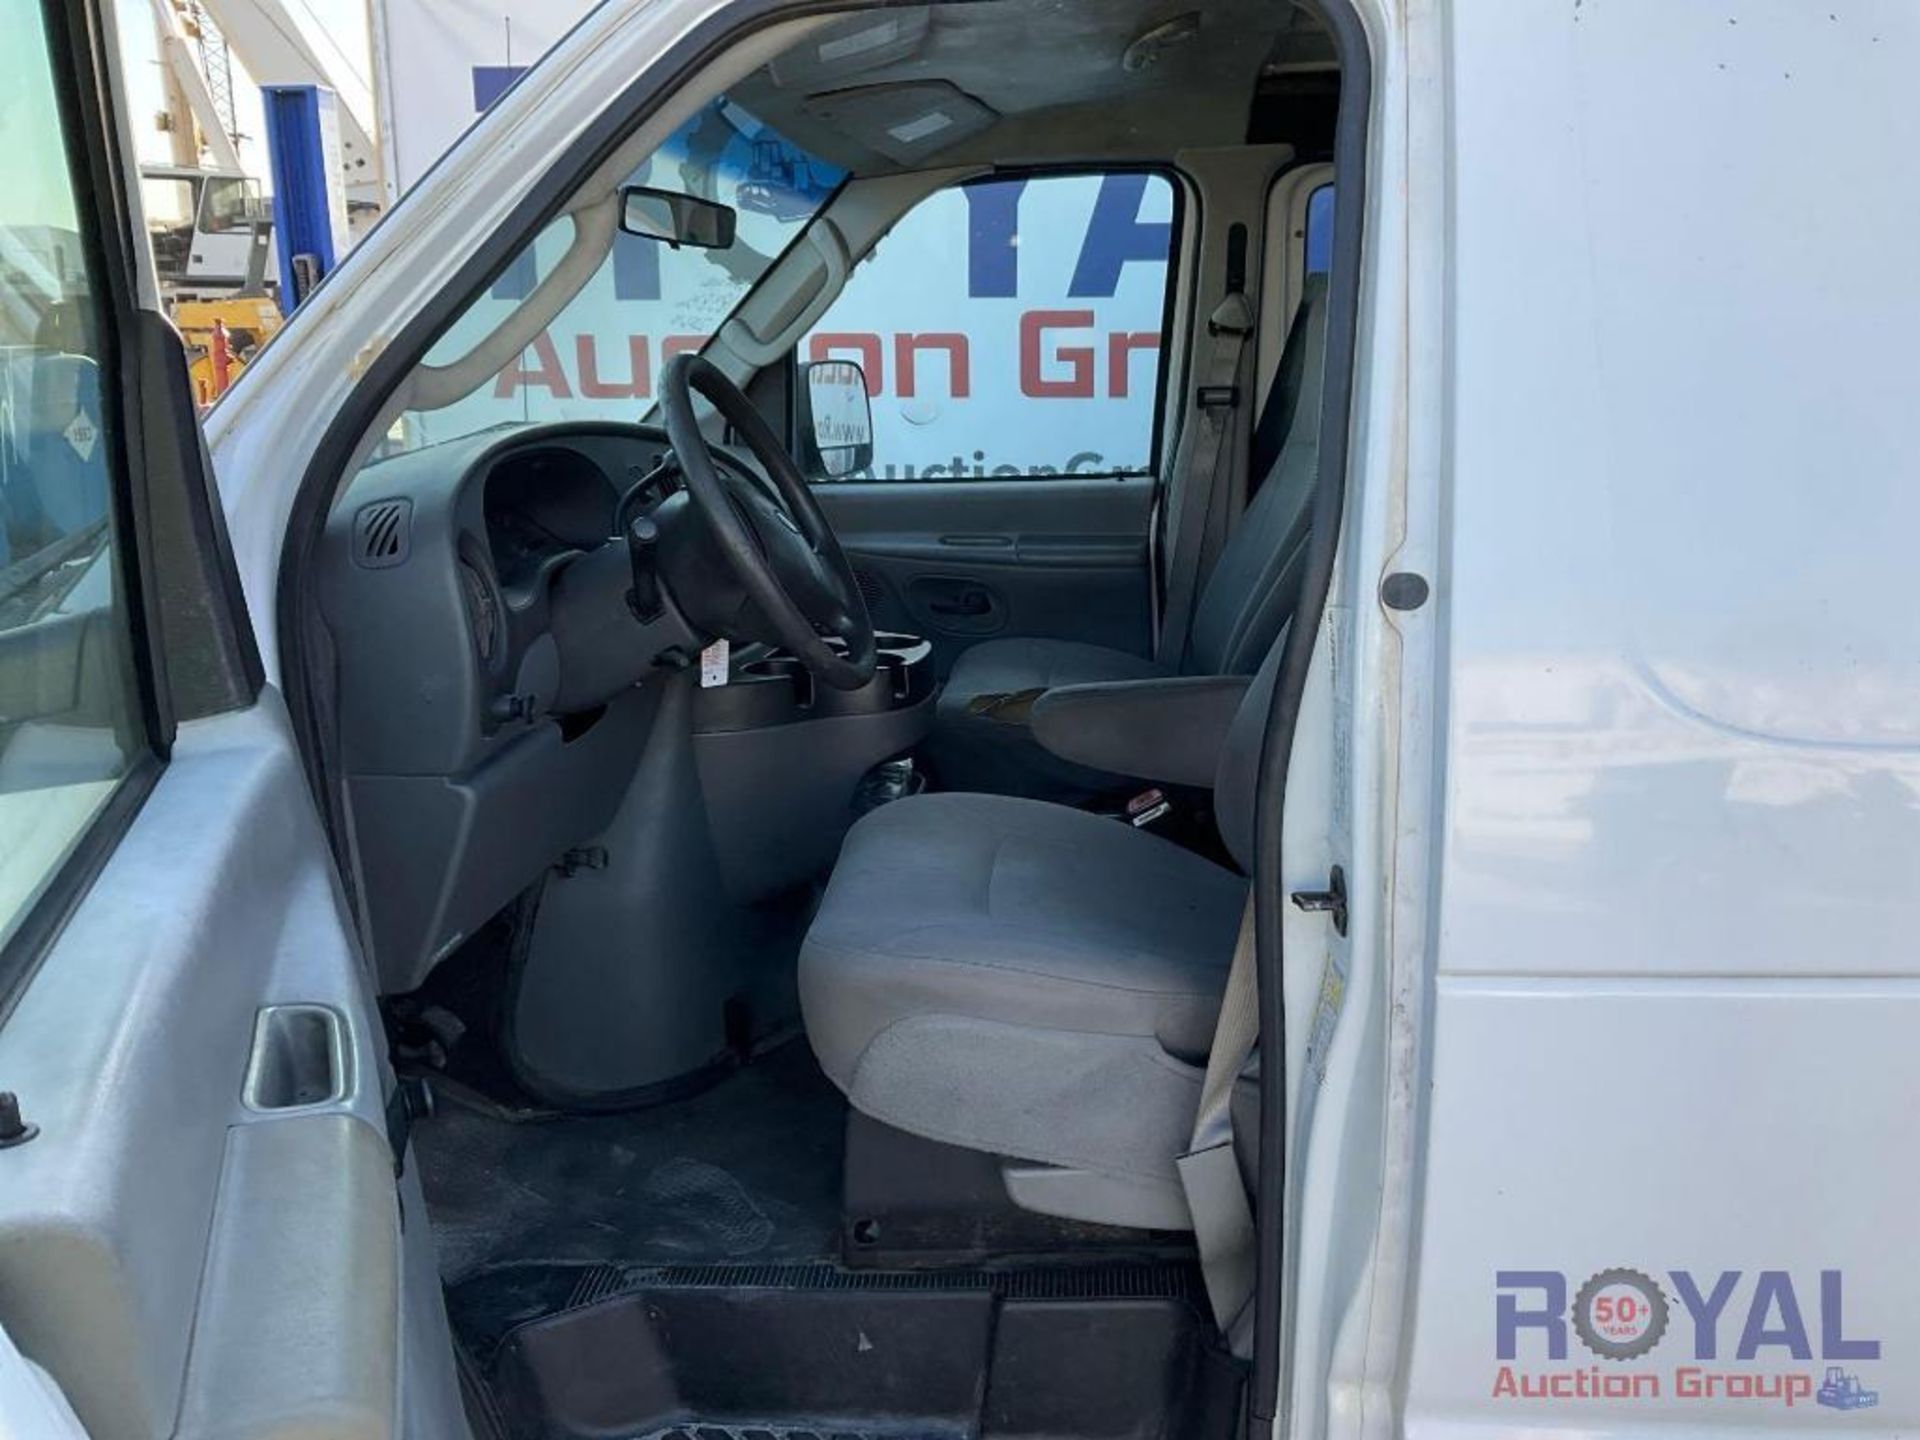 2006 Ford E350 Cargo Van - Image 12 of 36